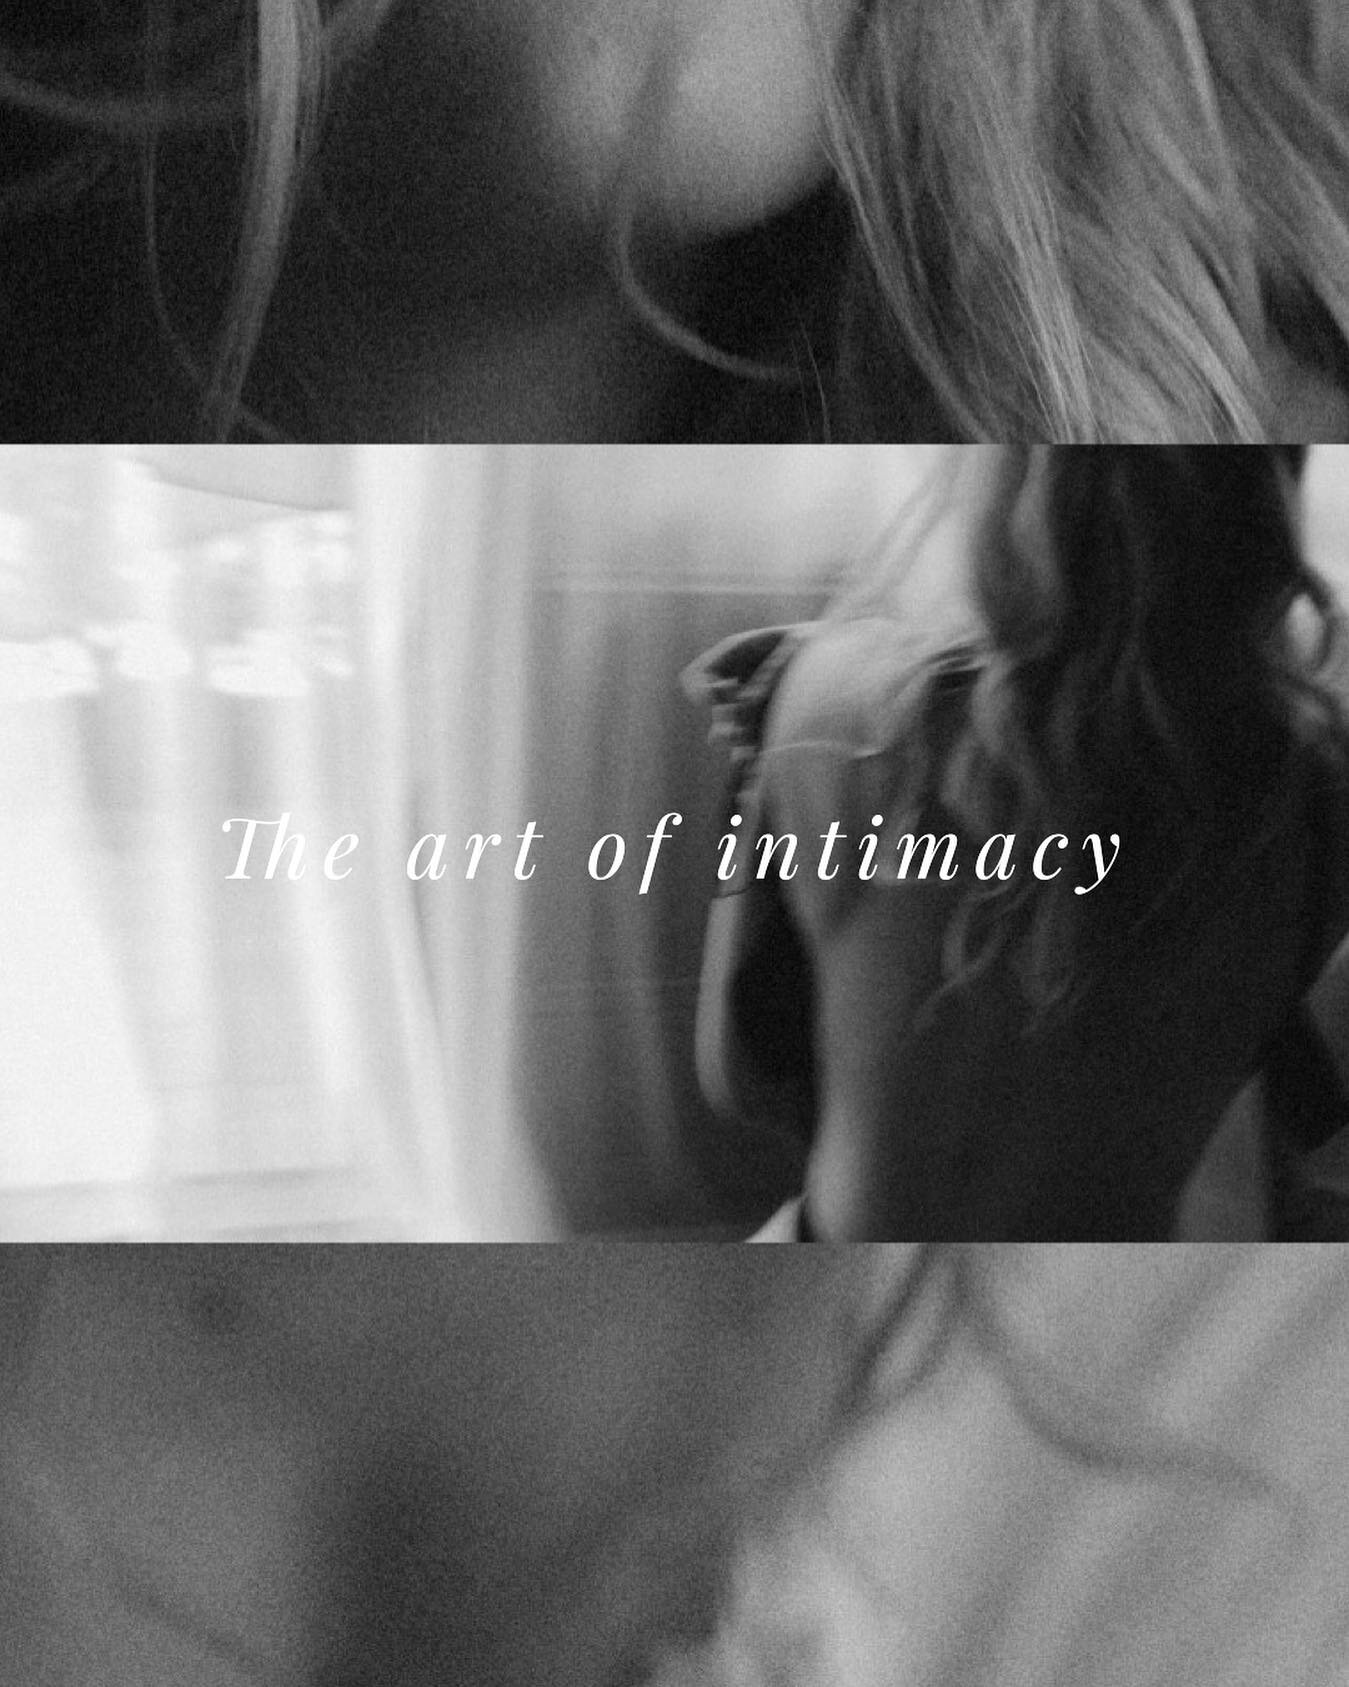 The art of intimacy. 

My boudoir imagery, is all about redefining intimacy with in the soul of a Woman. My images are not your typical raunchy boudoir; it's an art form that speaks to mood, closeness, and the elegance of the female form.
 
It's in t